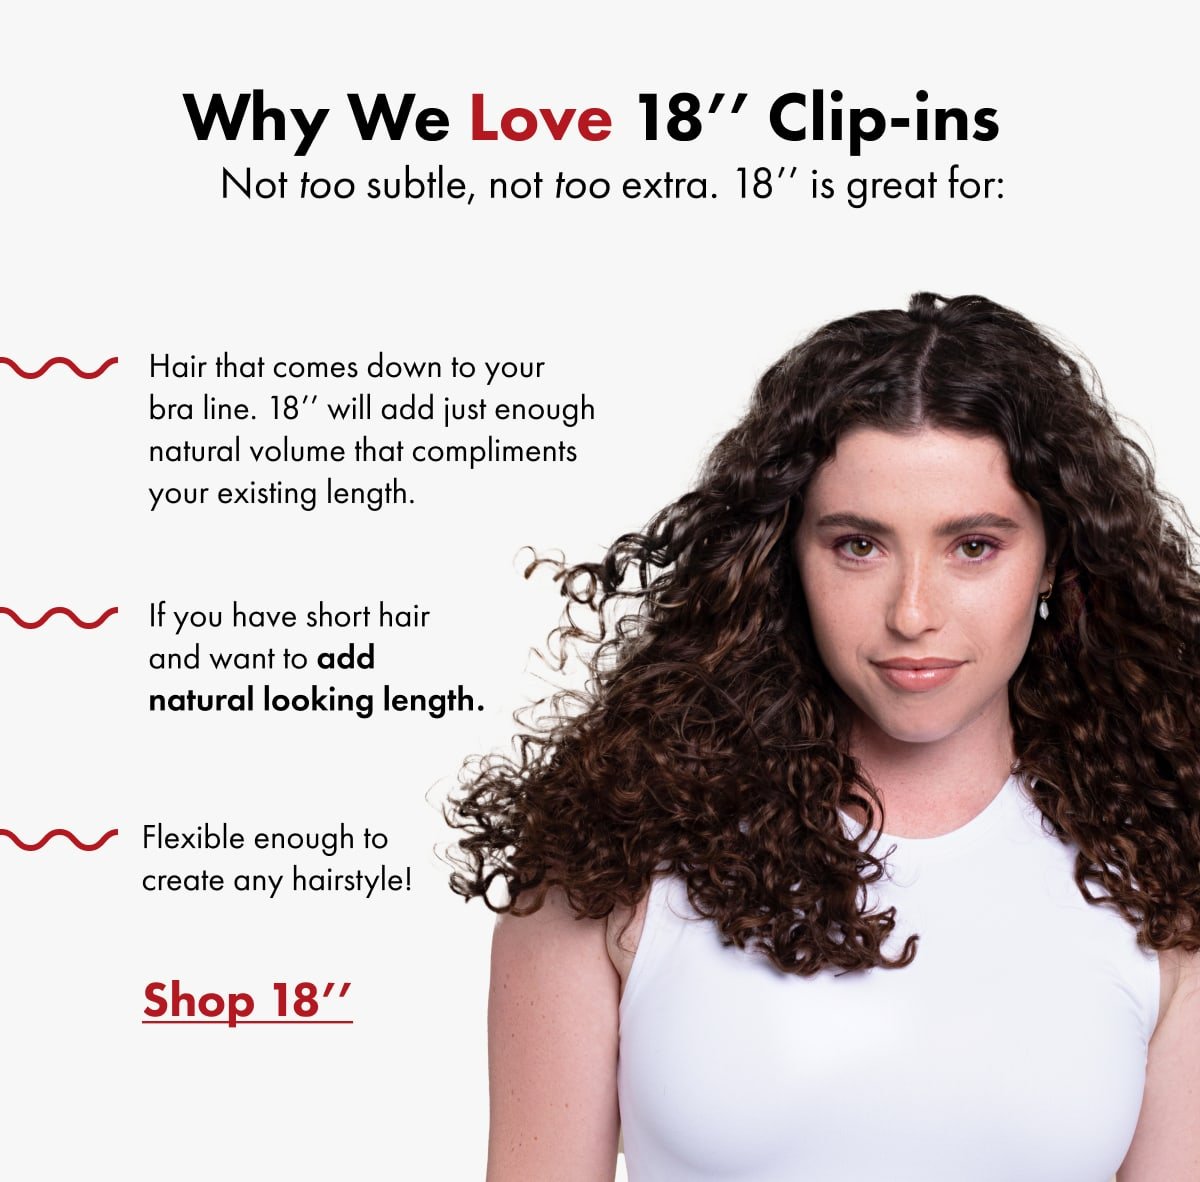 18'' will add just enough natural volume that will compliment your existing length.